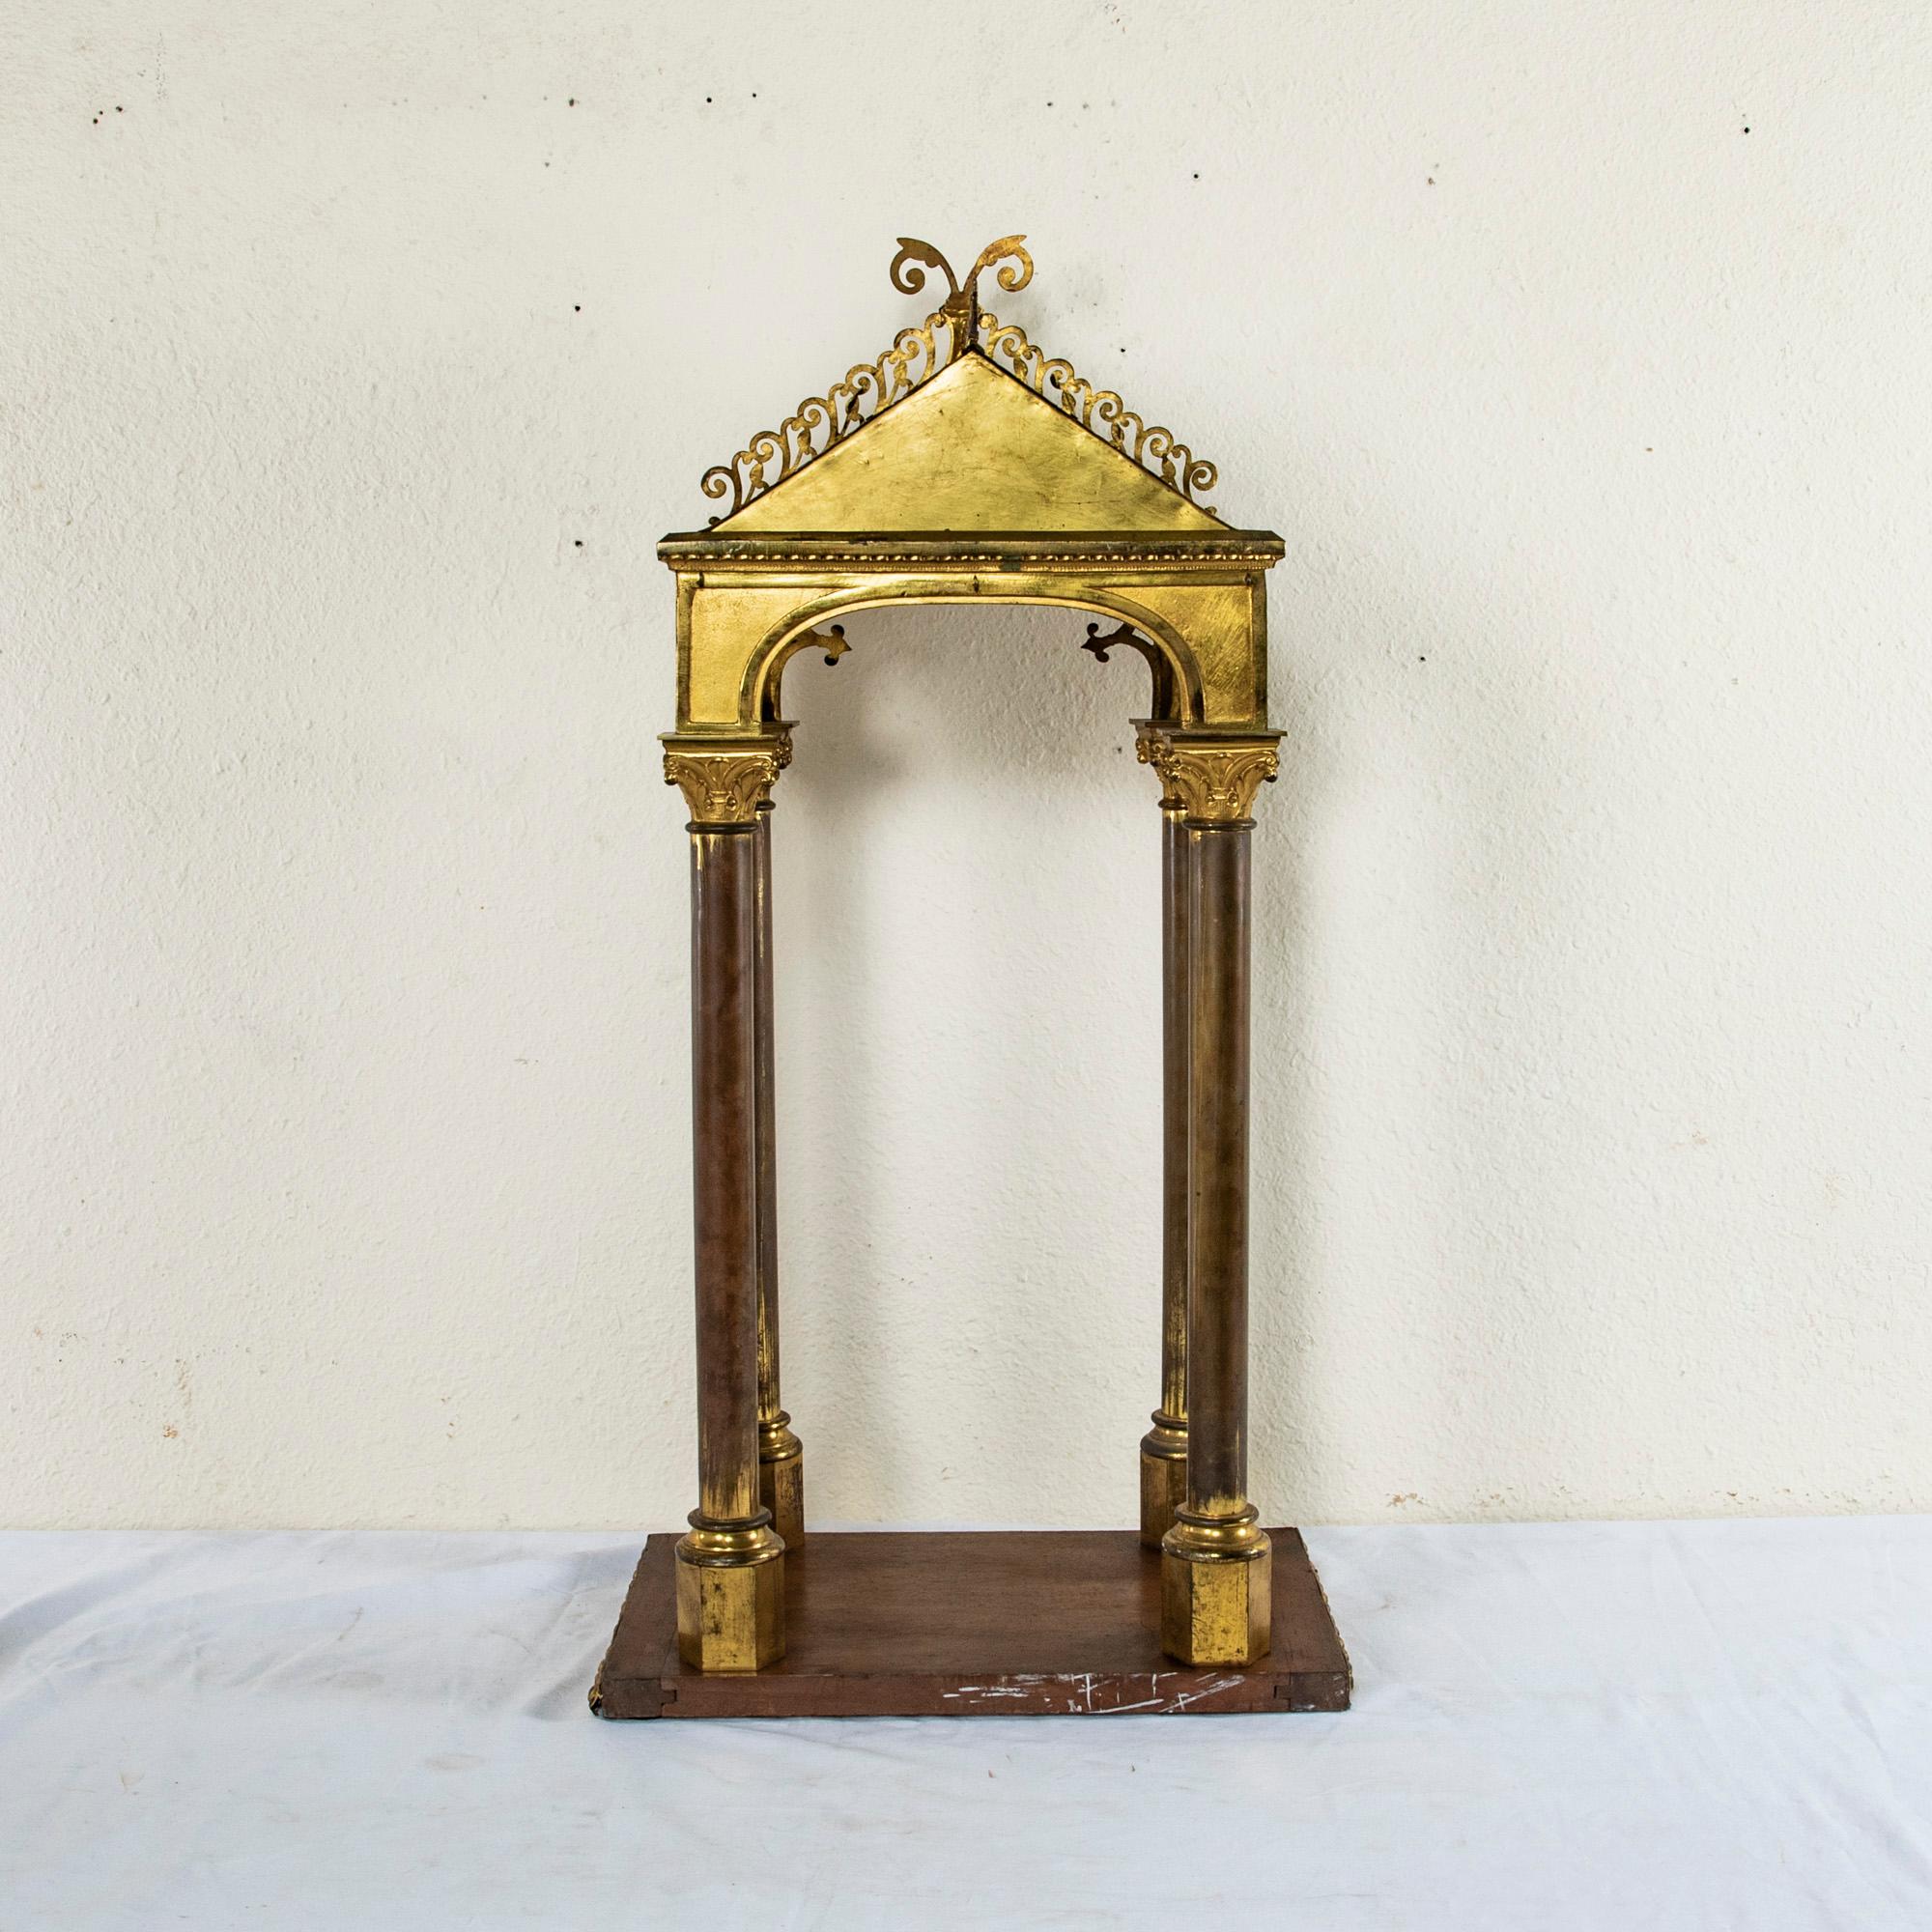 Early 20th Century Italian Gilt Brass and Wooden Altar or Sculpture Stand For Sale 1